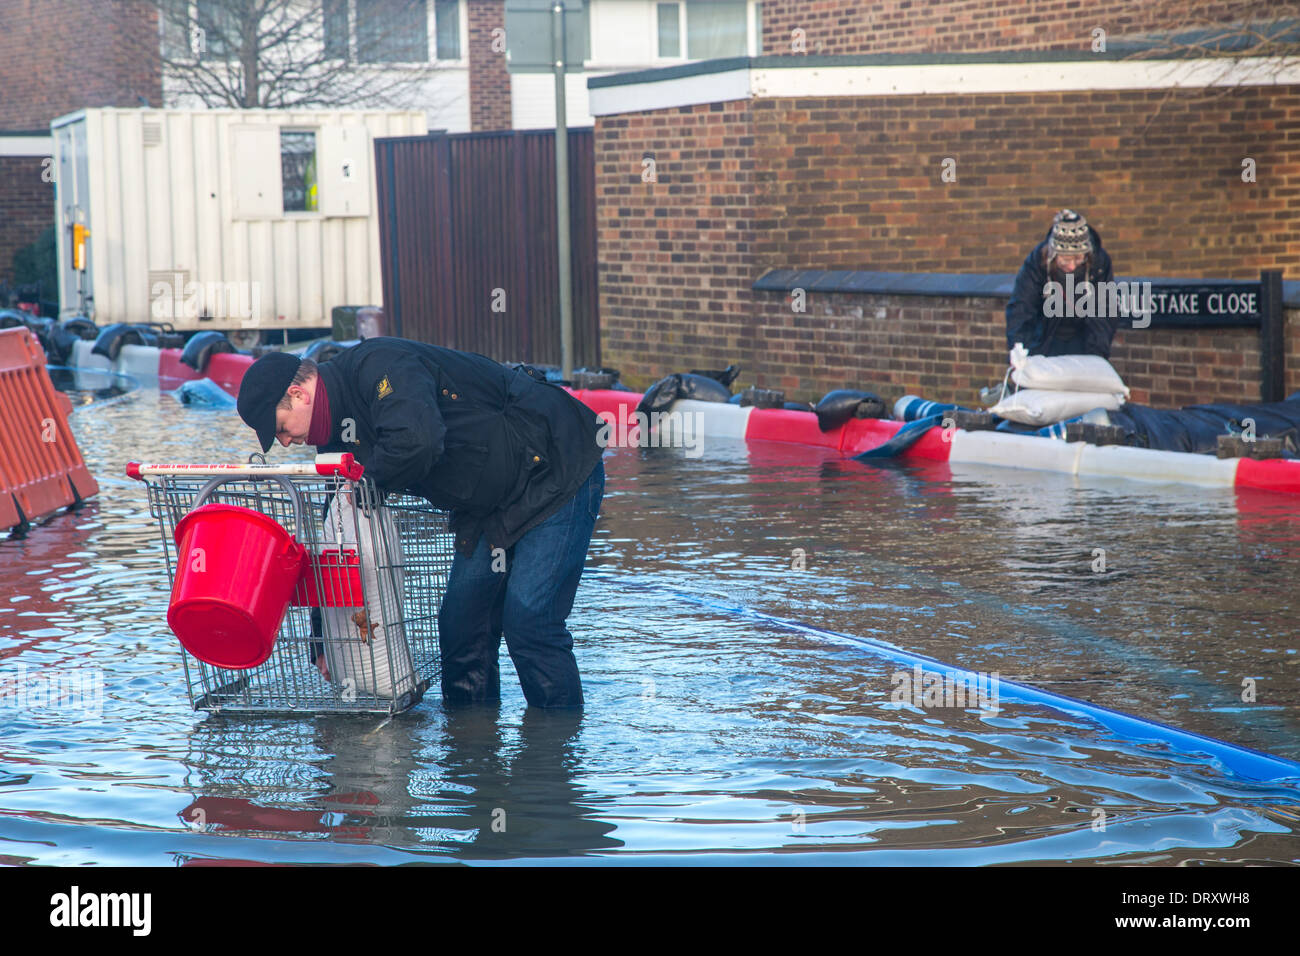 A Man fetches Sandbags during the Floods, Botley Road, Oxford, January 2014 Stock Photo